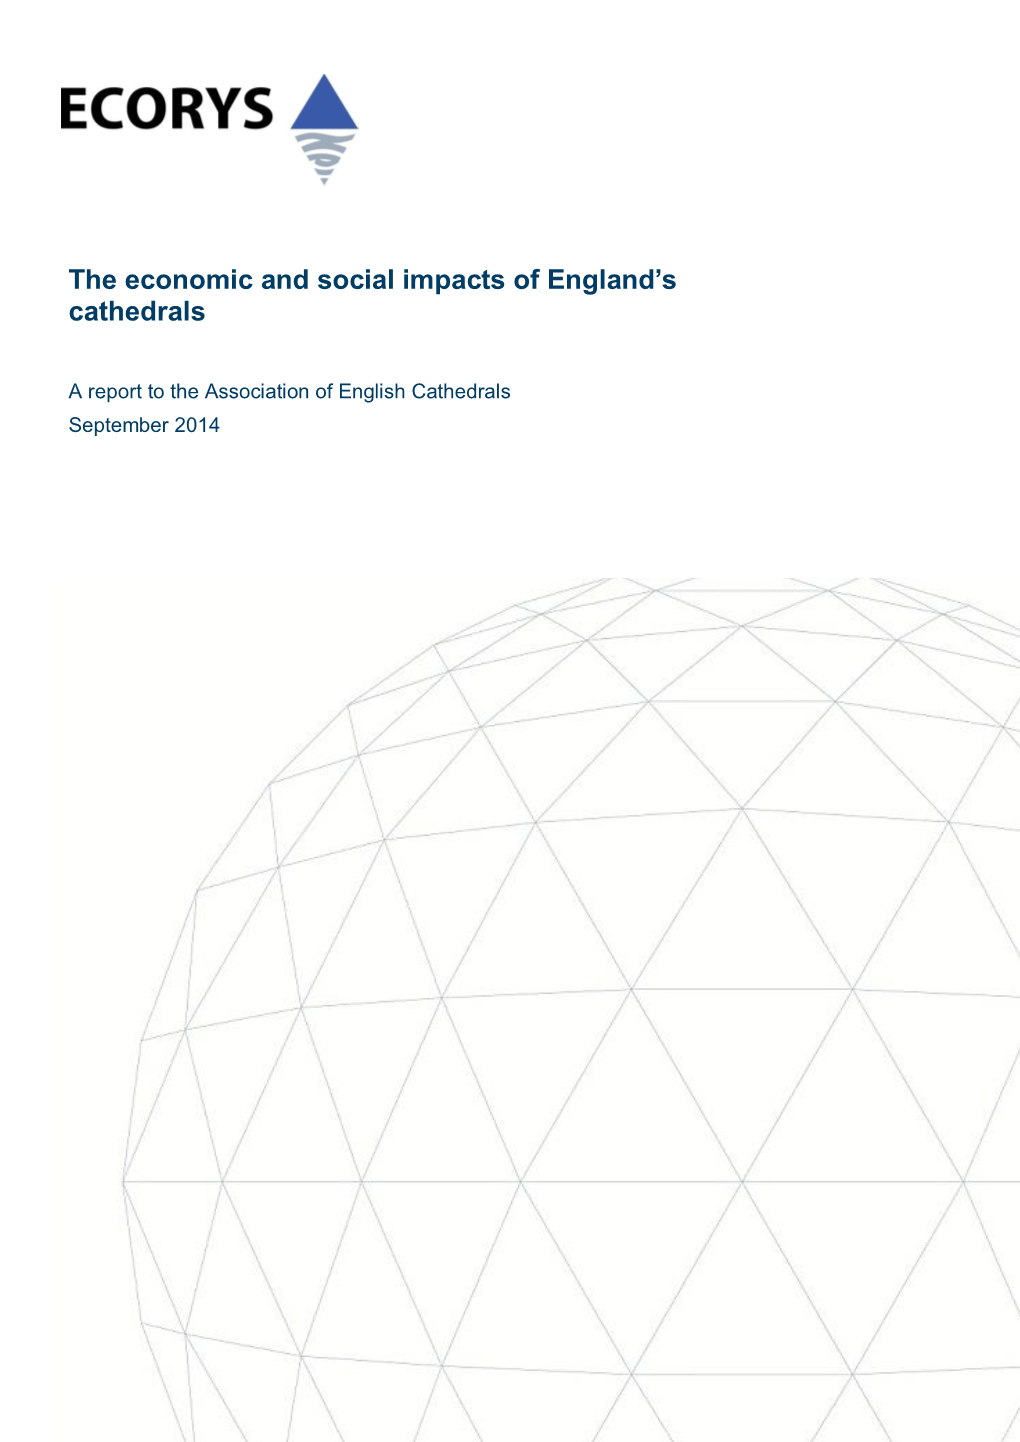 The Economic and Social Impacts of England's Cathedrals 2014